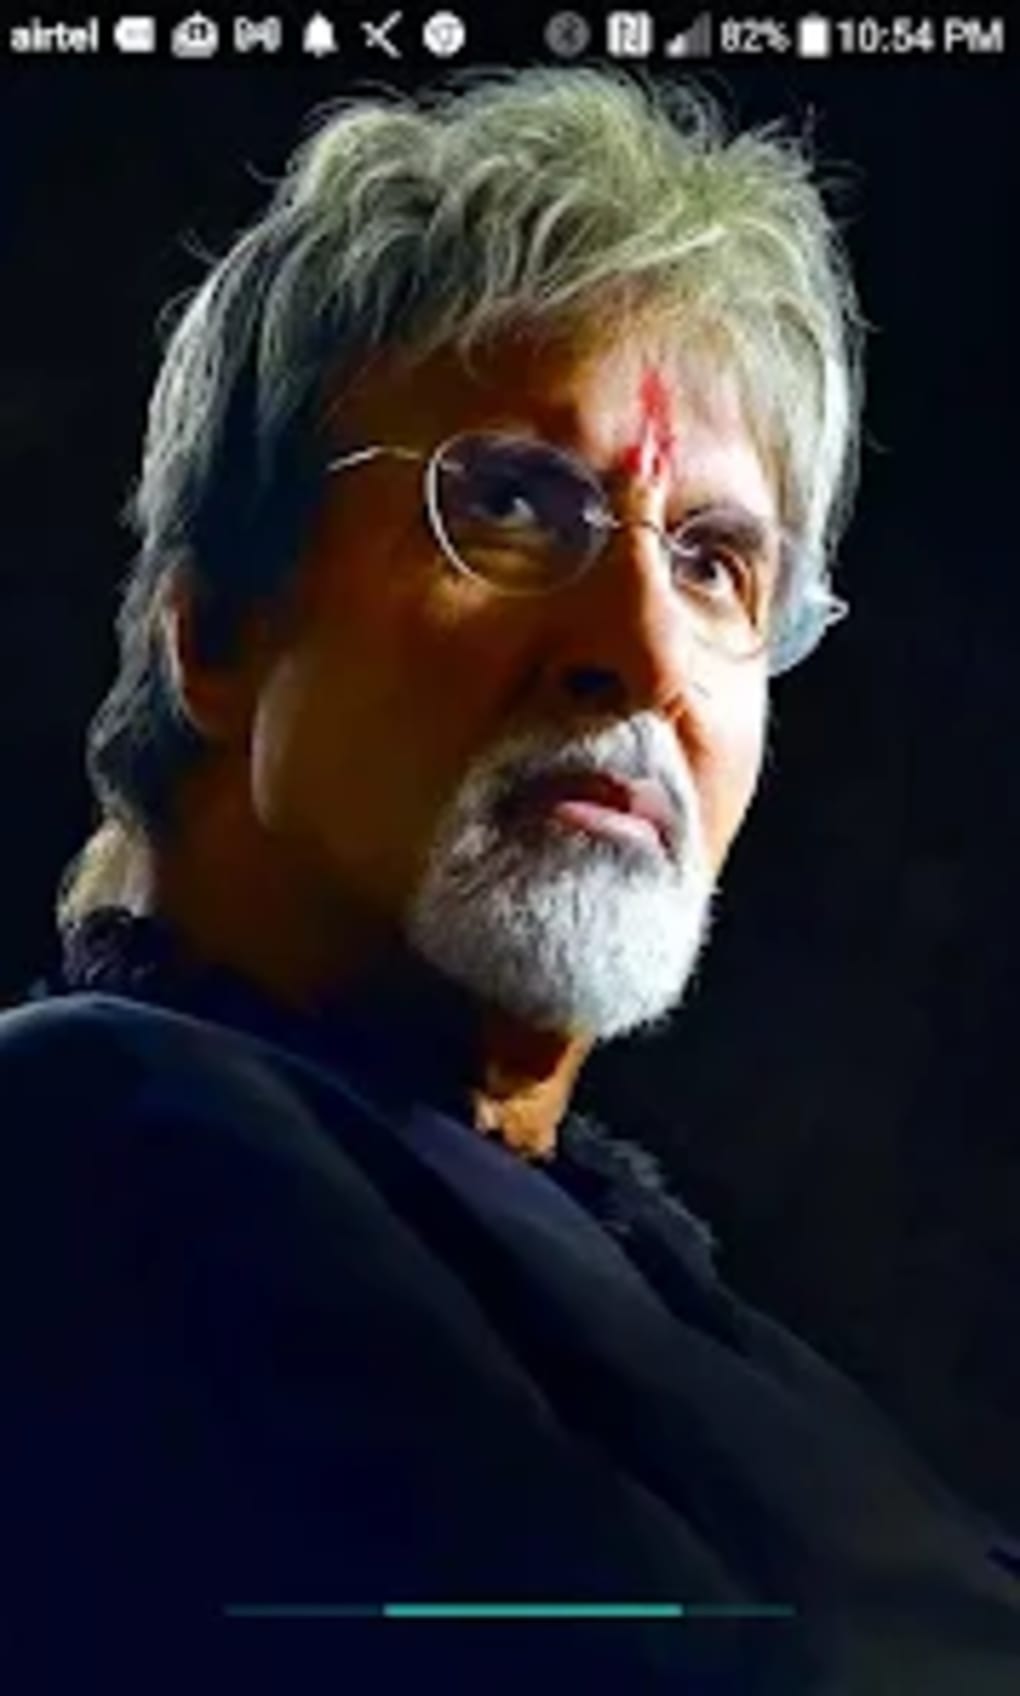 Amitabh Bachchan Photos, Images, HD Wallpapers, Amitabh Bachchan HD Images,  Photos - Bollywood Hungama